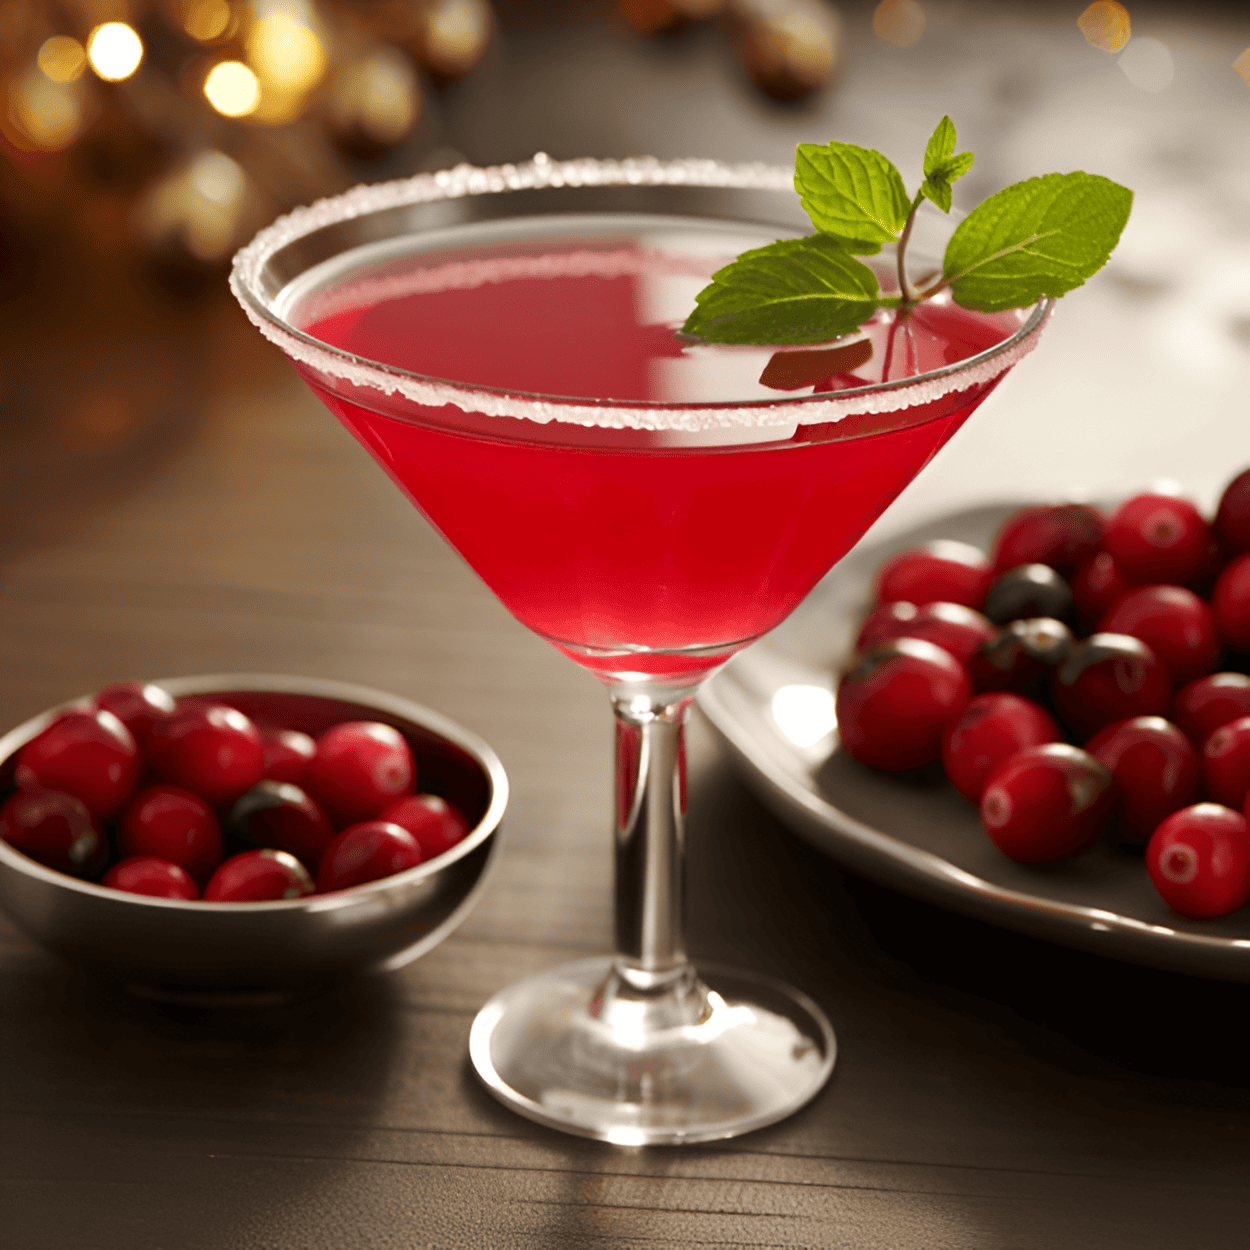 Cranberry Kringle Cocktail Recipe - The Cranberry Kringle Cocktail is a delightful blend of sweet and tart flavors. The cranberry juice provides a tangy kick, while the simple syrup and orange liqueur add a sweet counterbalance. The vodka gives the cocktail a strong, robust backbone.